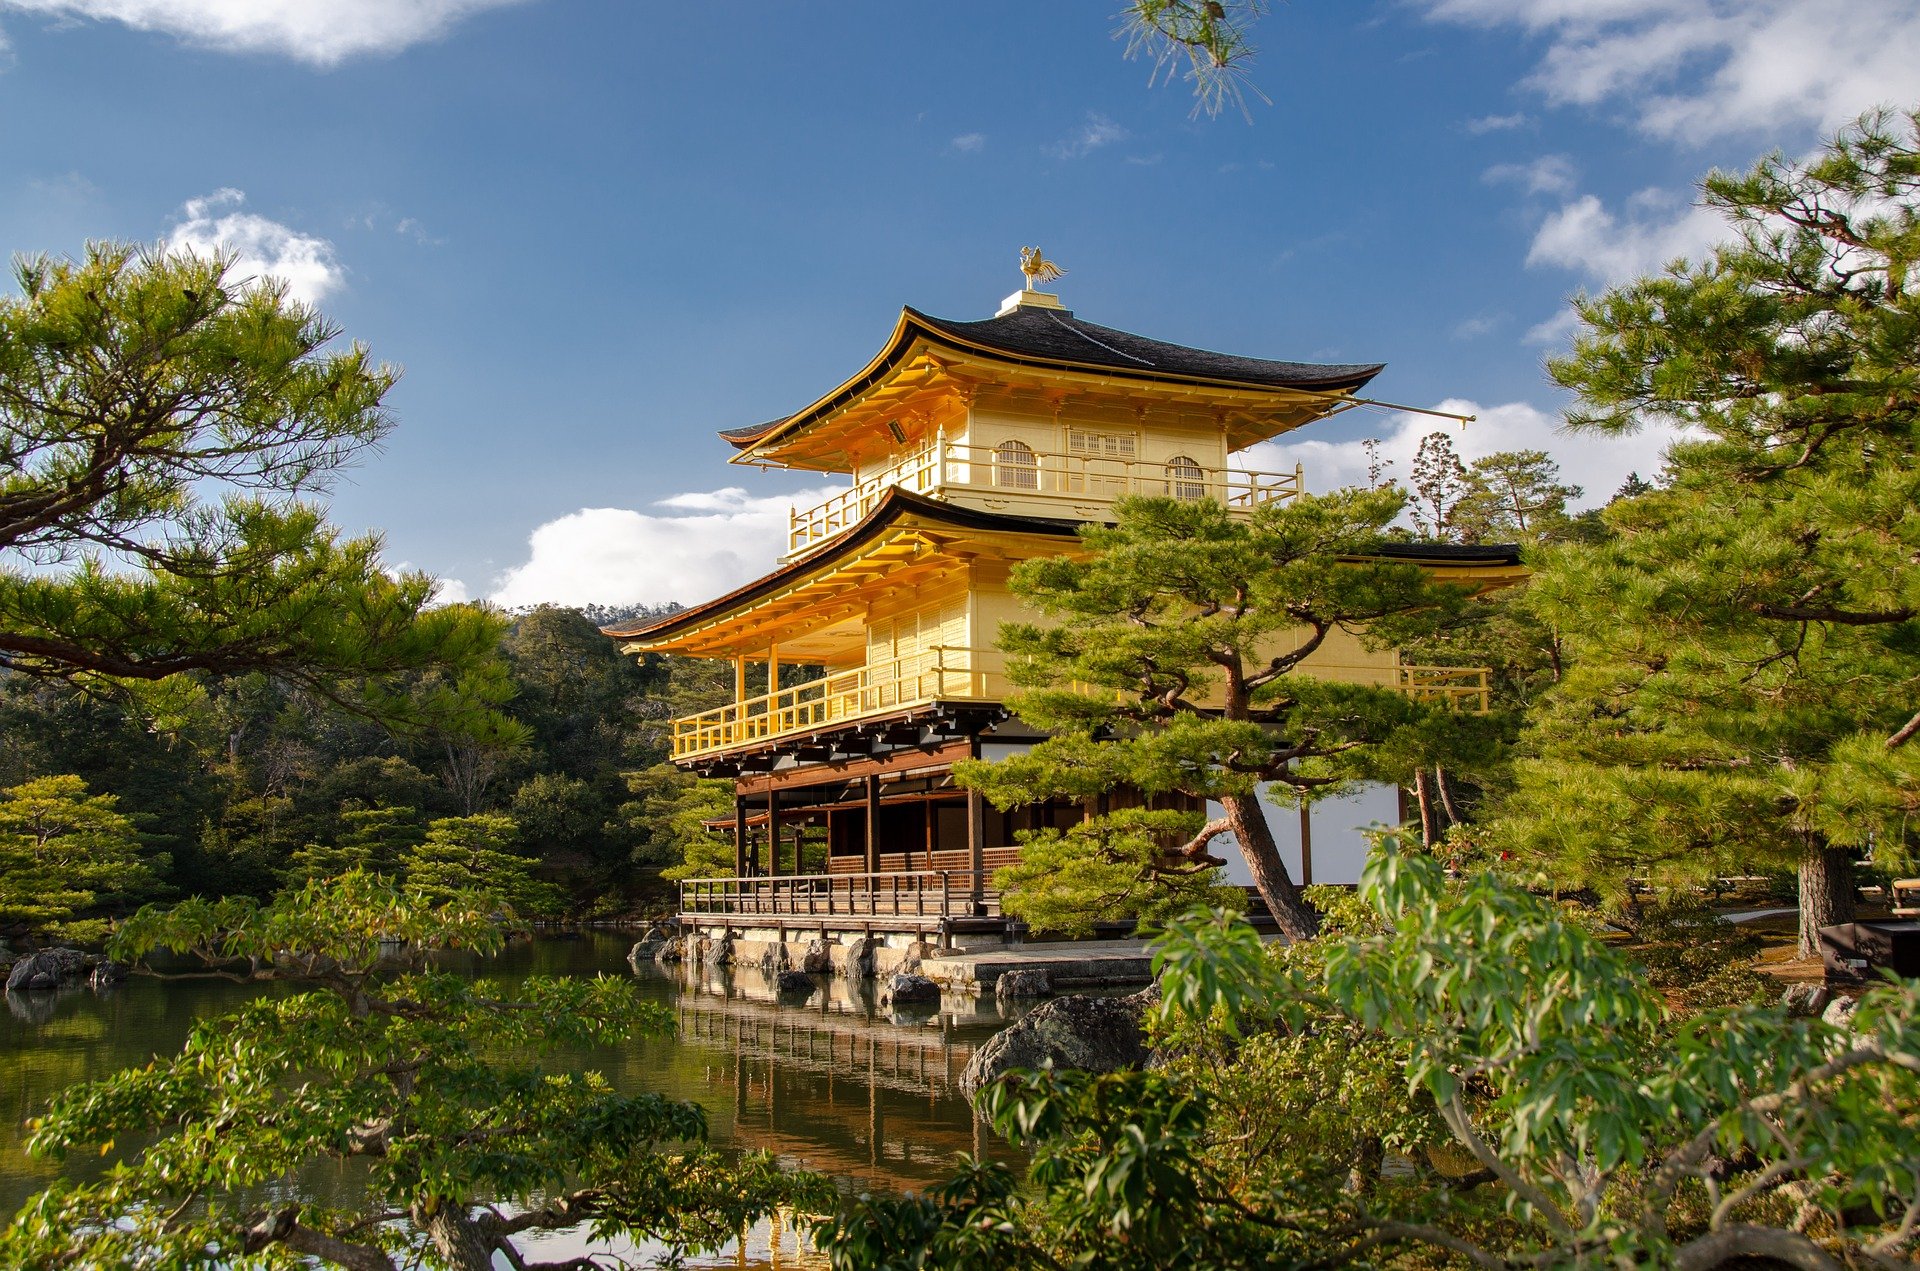 A temple surrounded by greenery by the lake in Japan